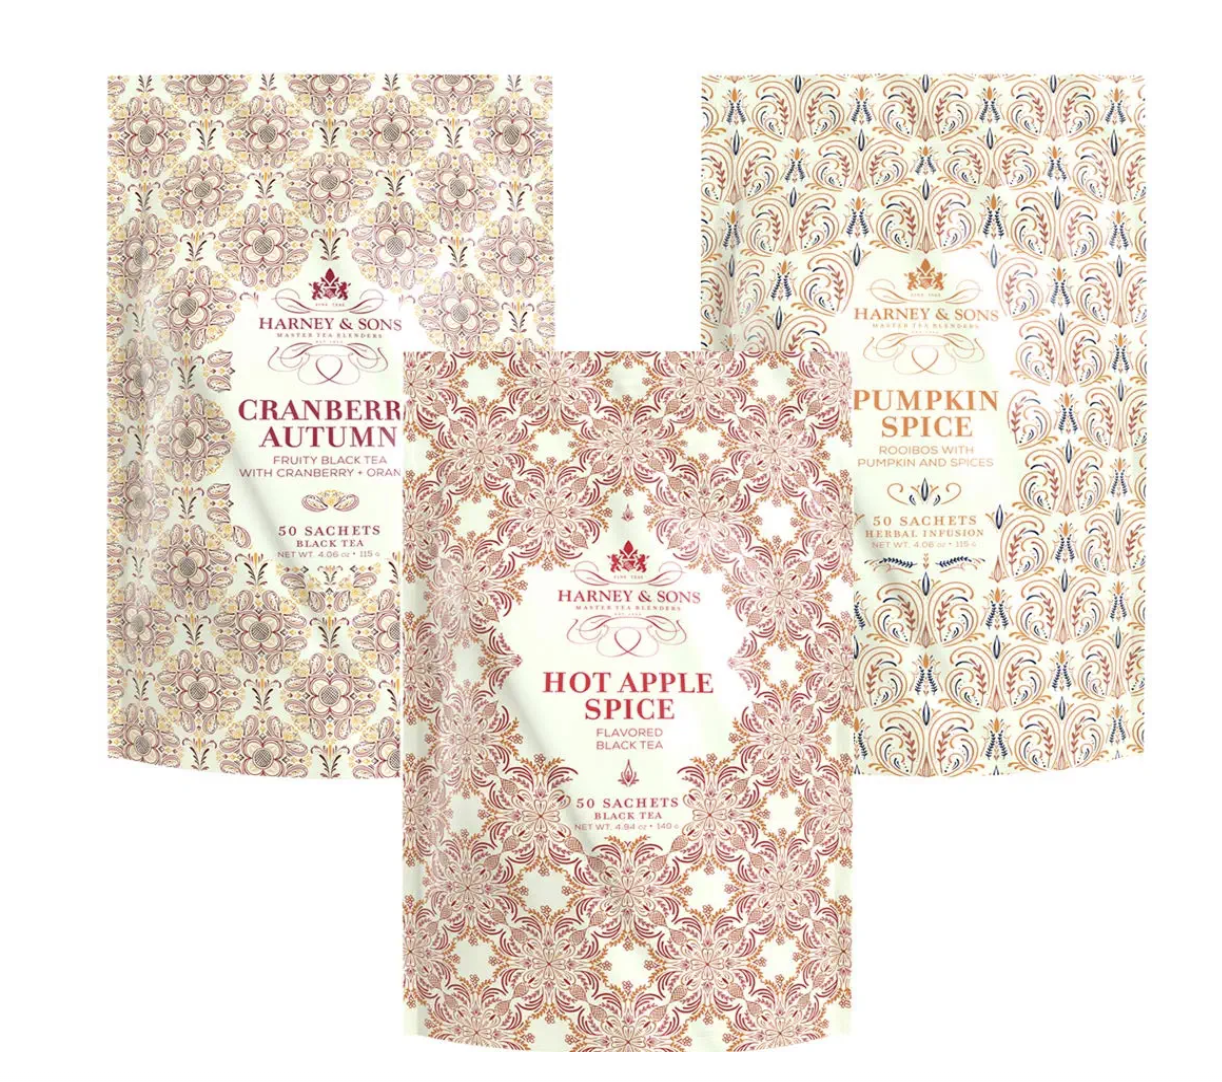 Harney & Sons Fall Tea Collection